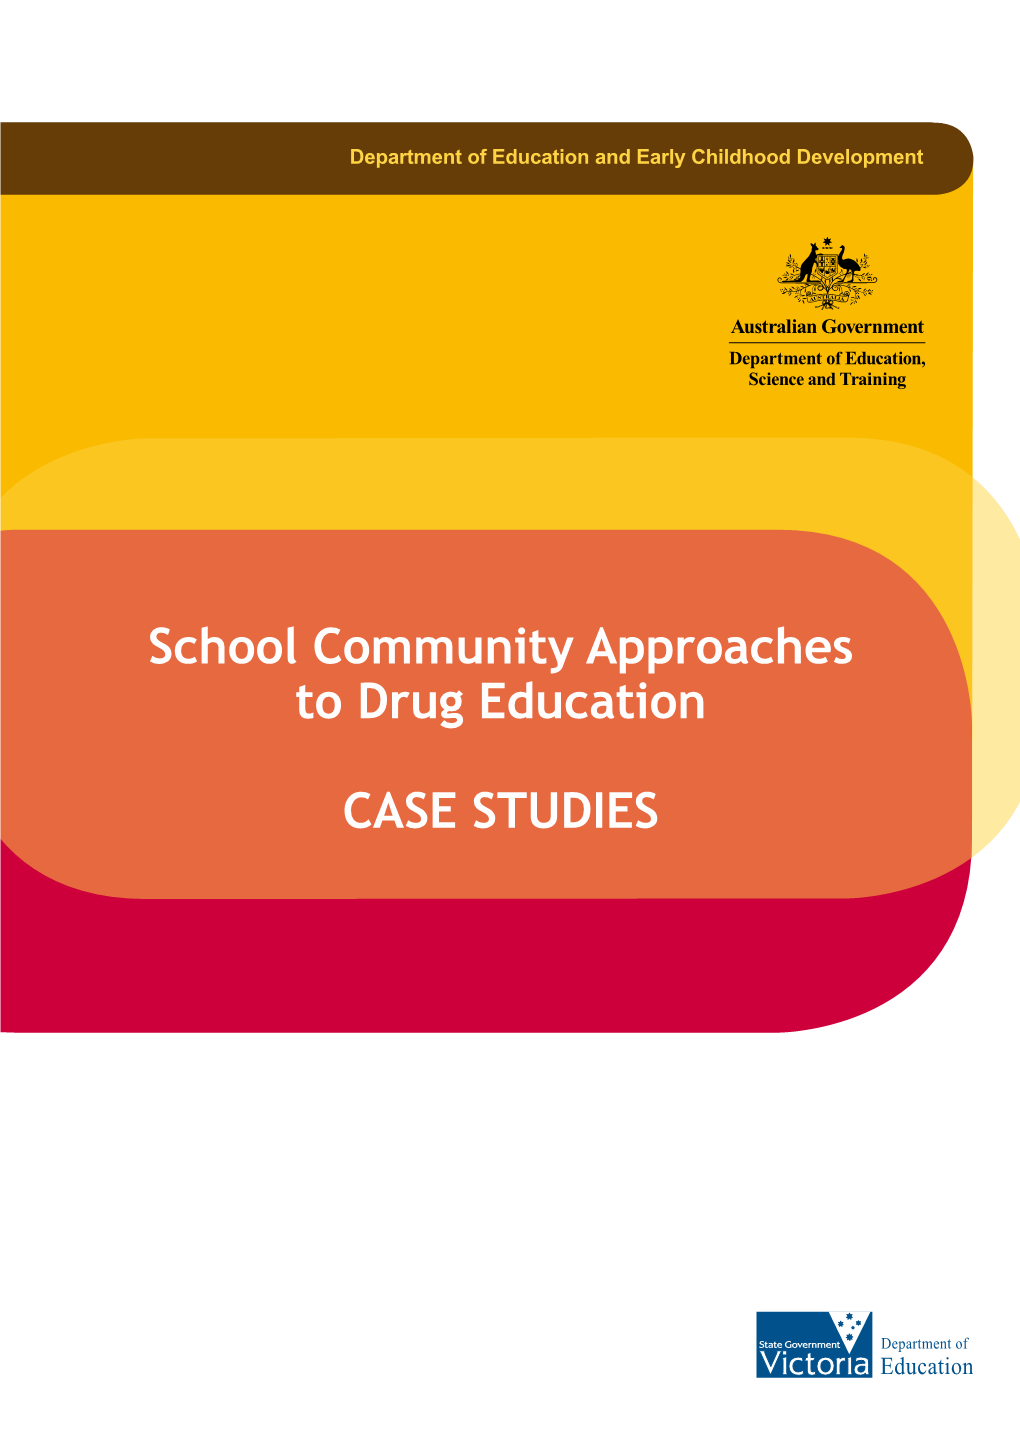 School Community Approaches to Drug Education CASE STUDIES